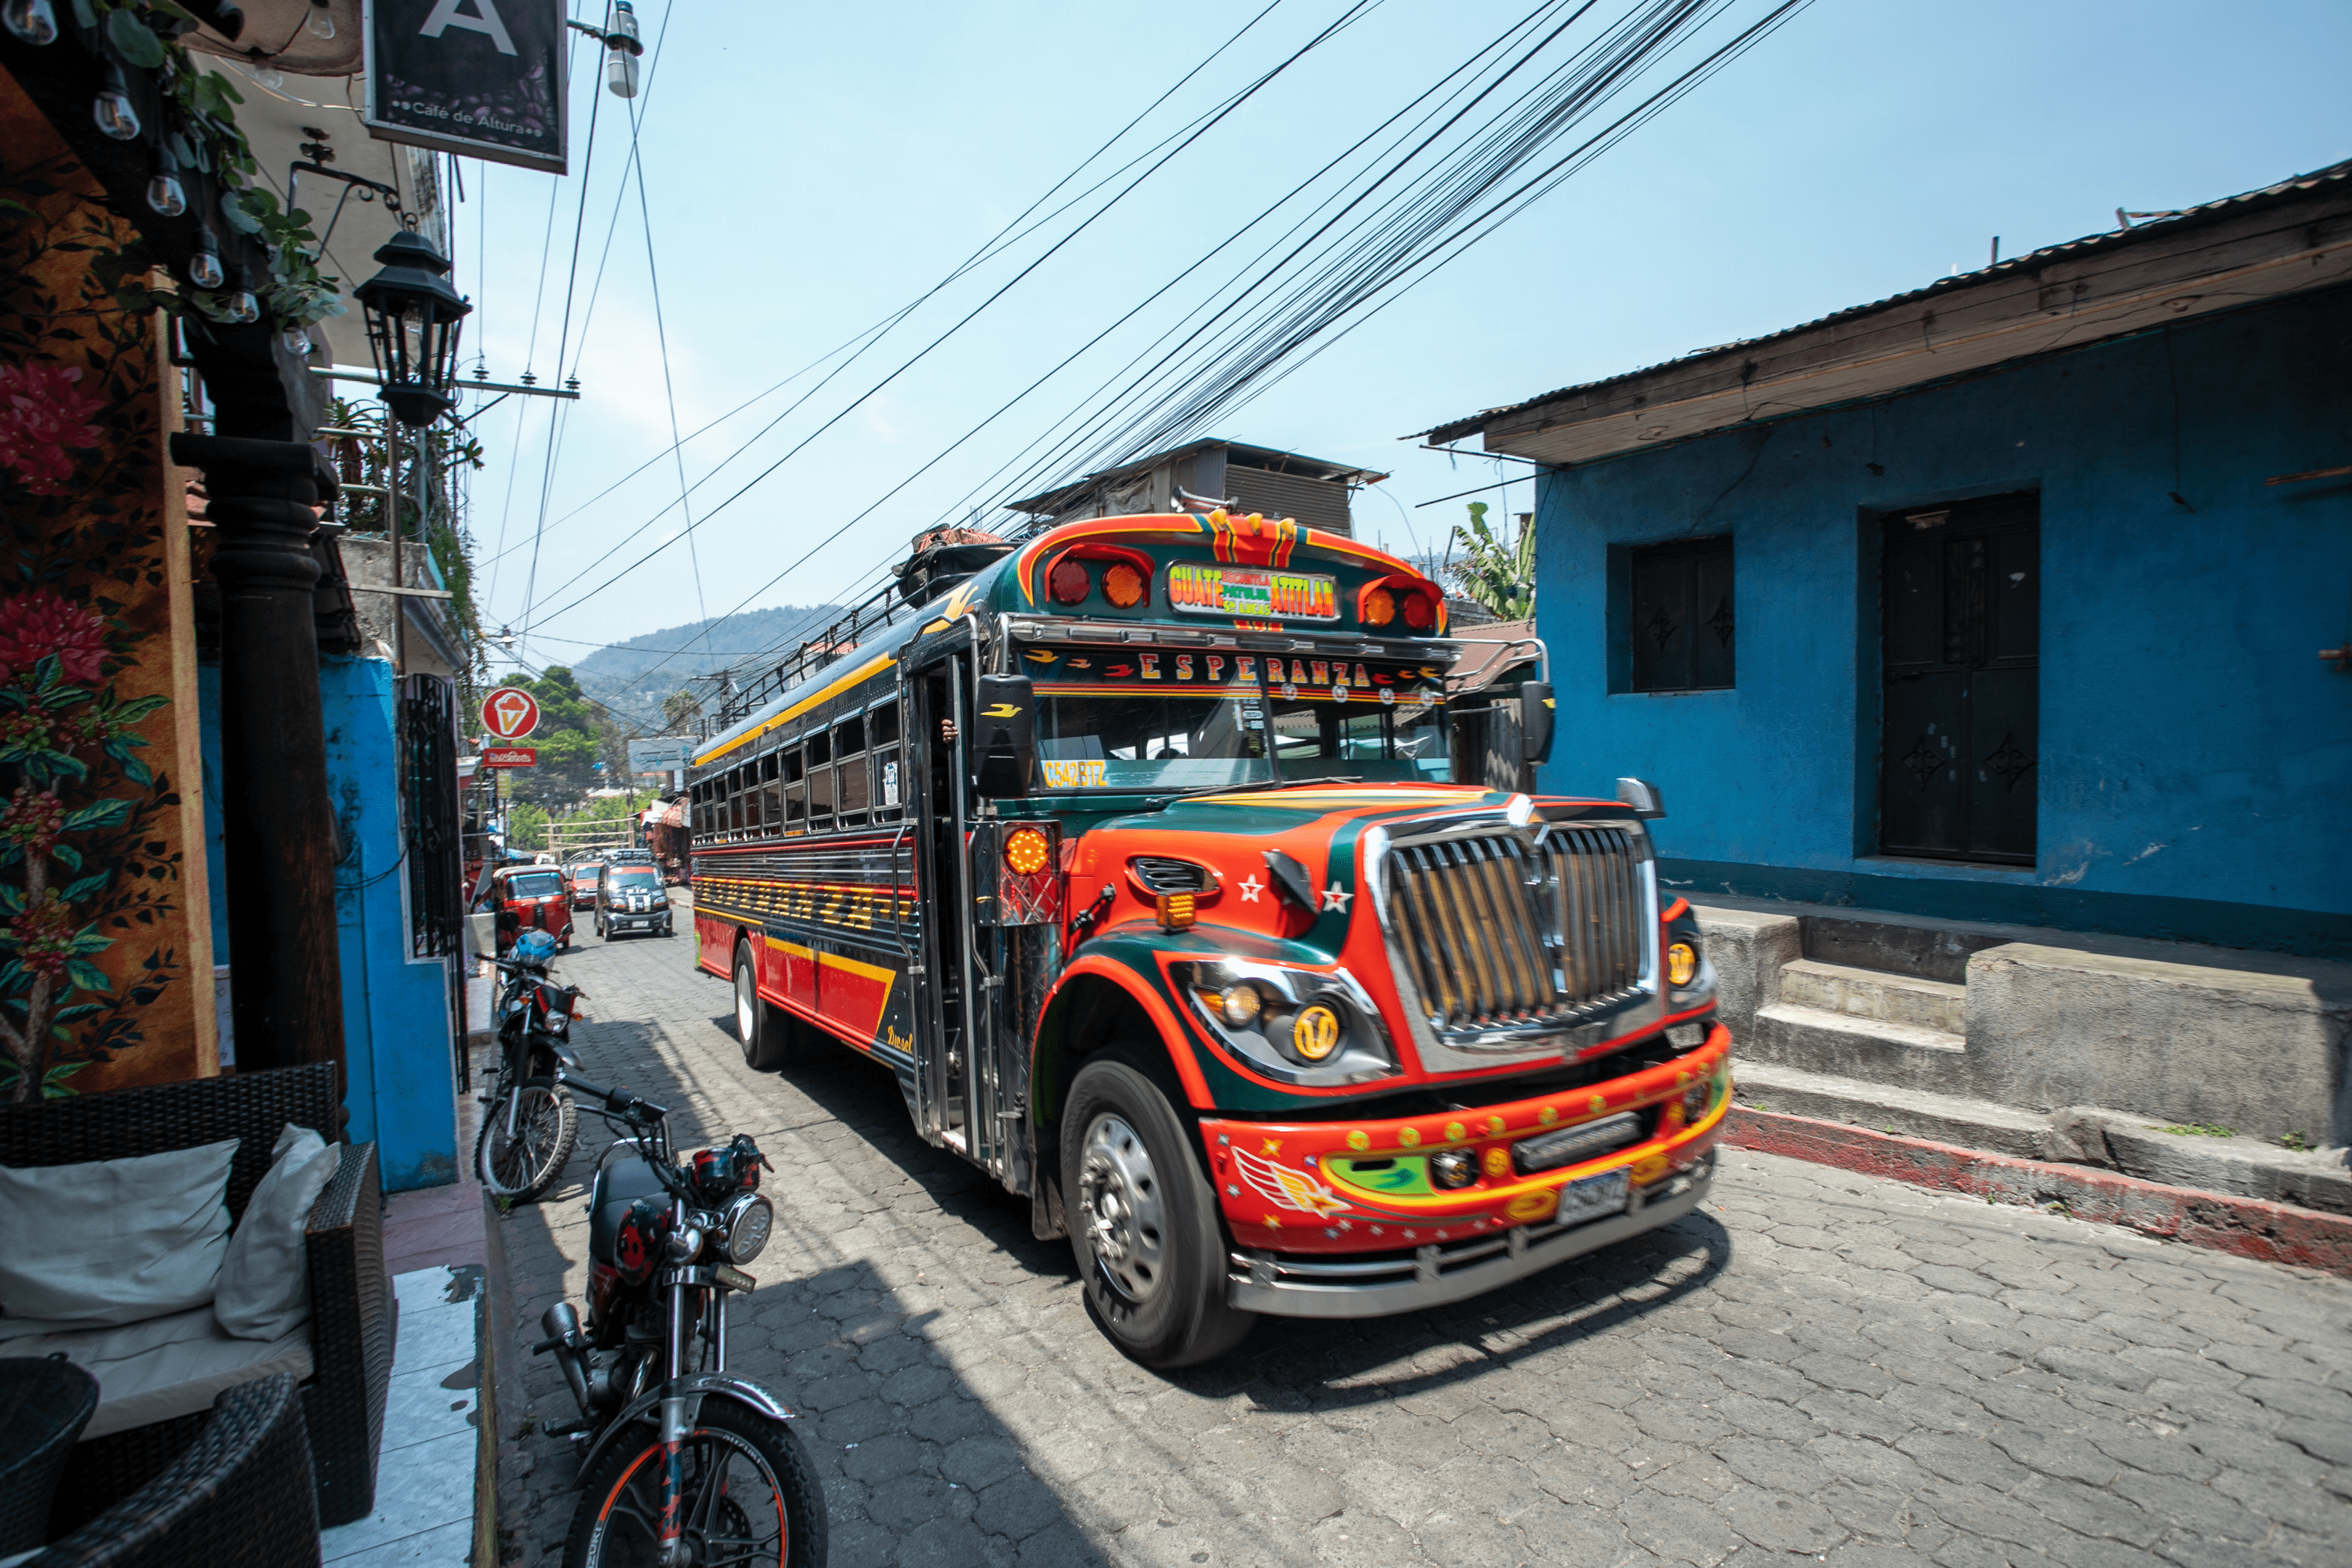 Brightly hand-painted american school bus driving through cobbled streets.